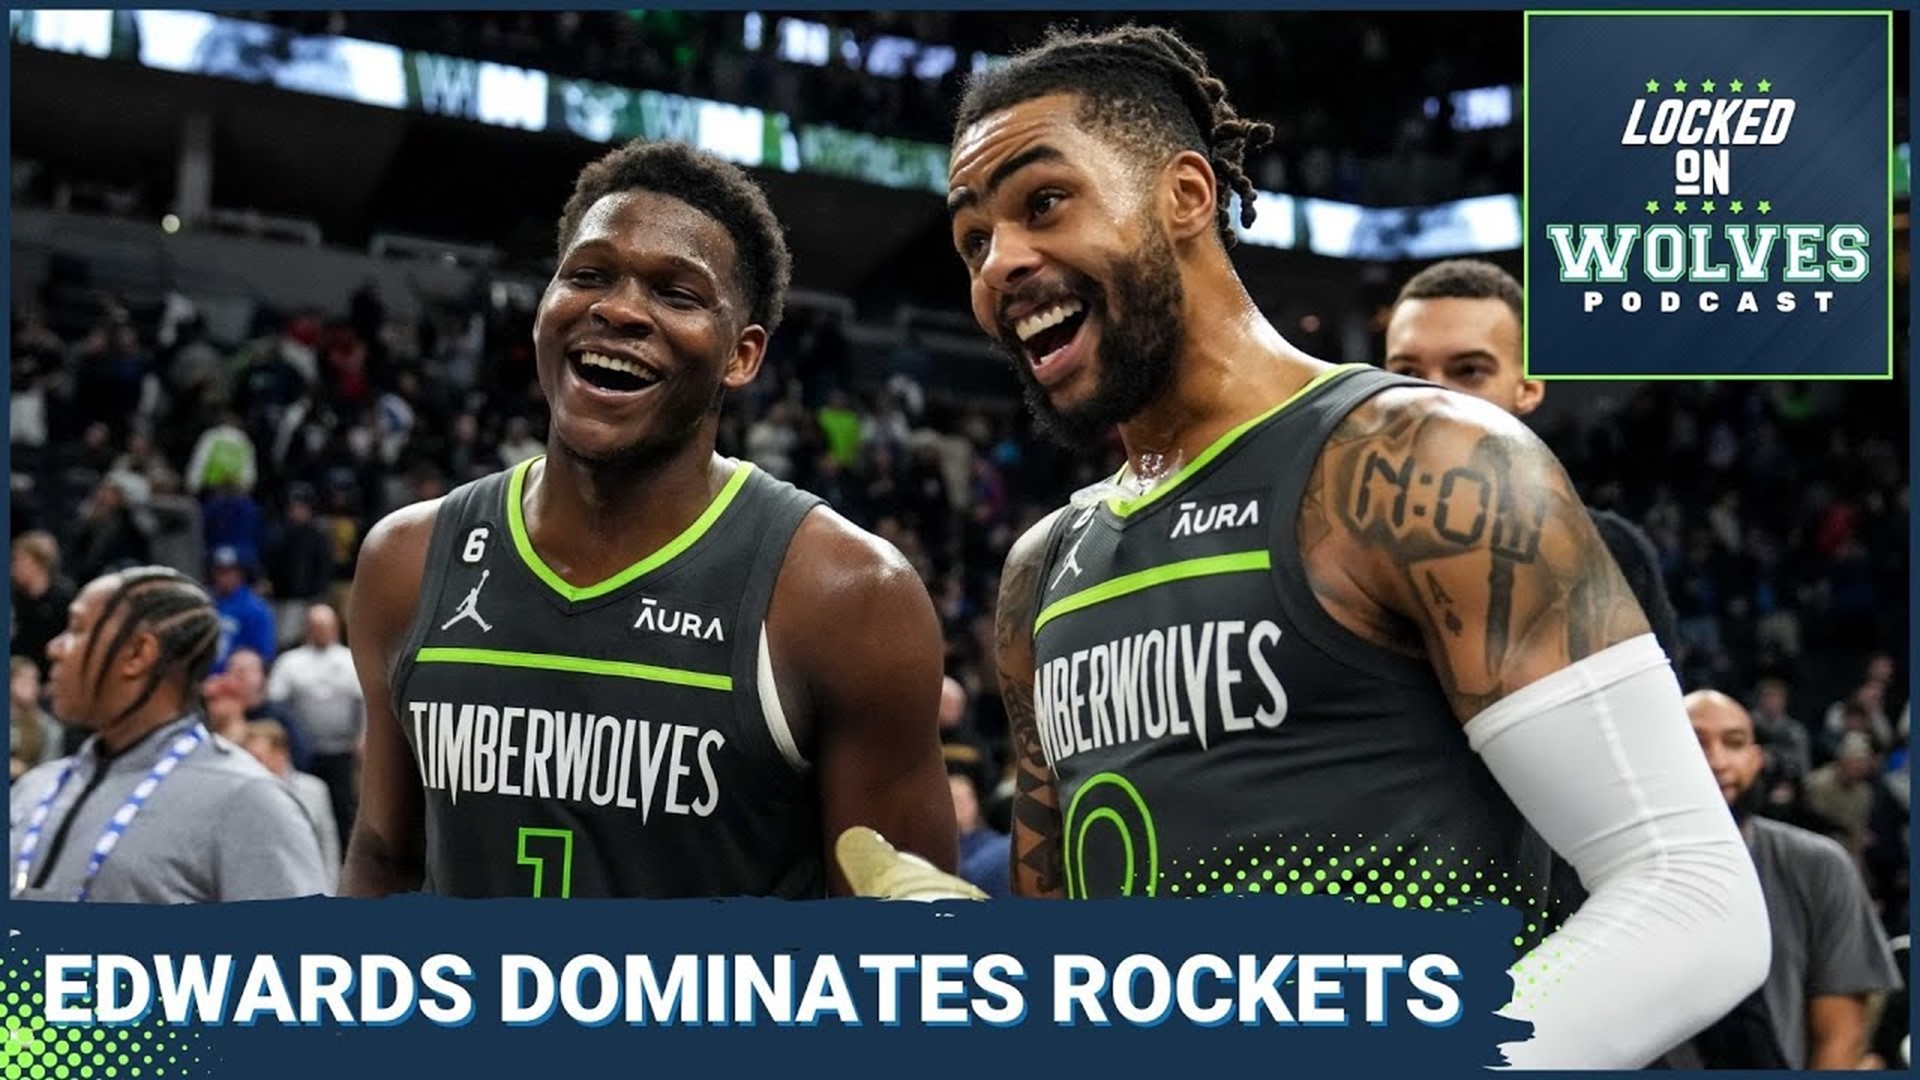 Anthony Edwards was truly dominant against the Houston Rockets as the Timberwolves won